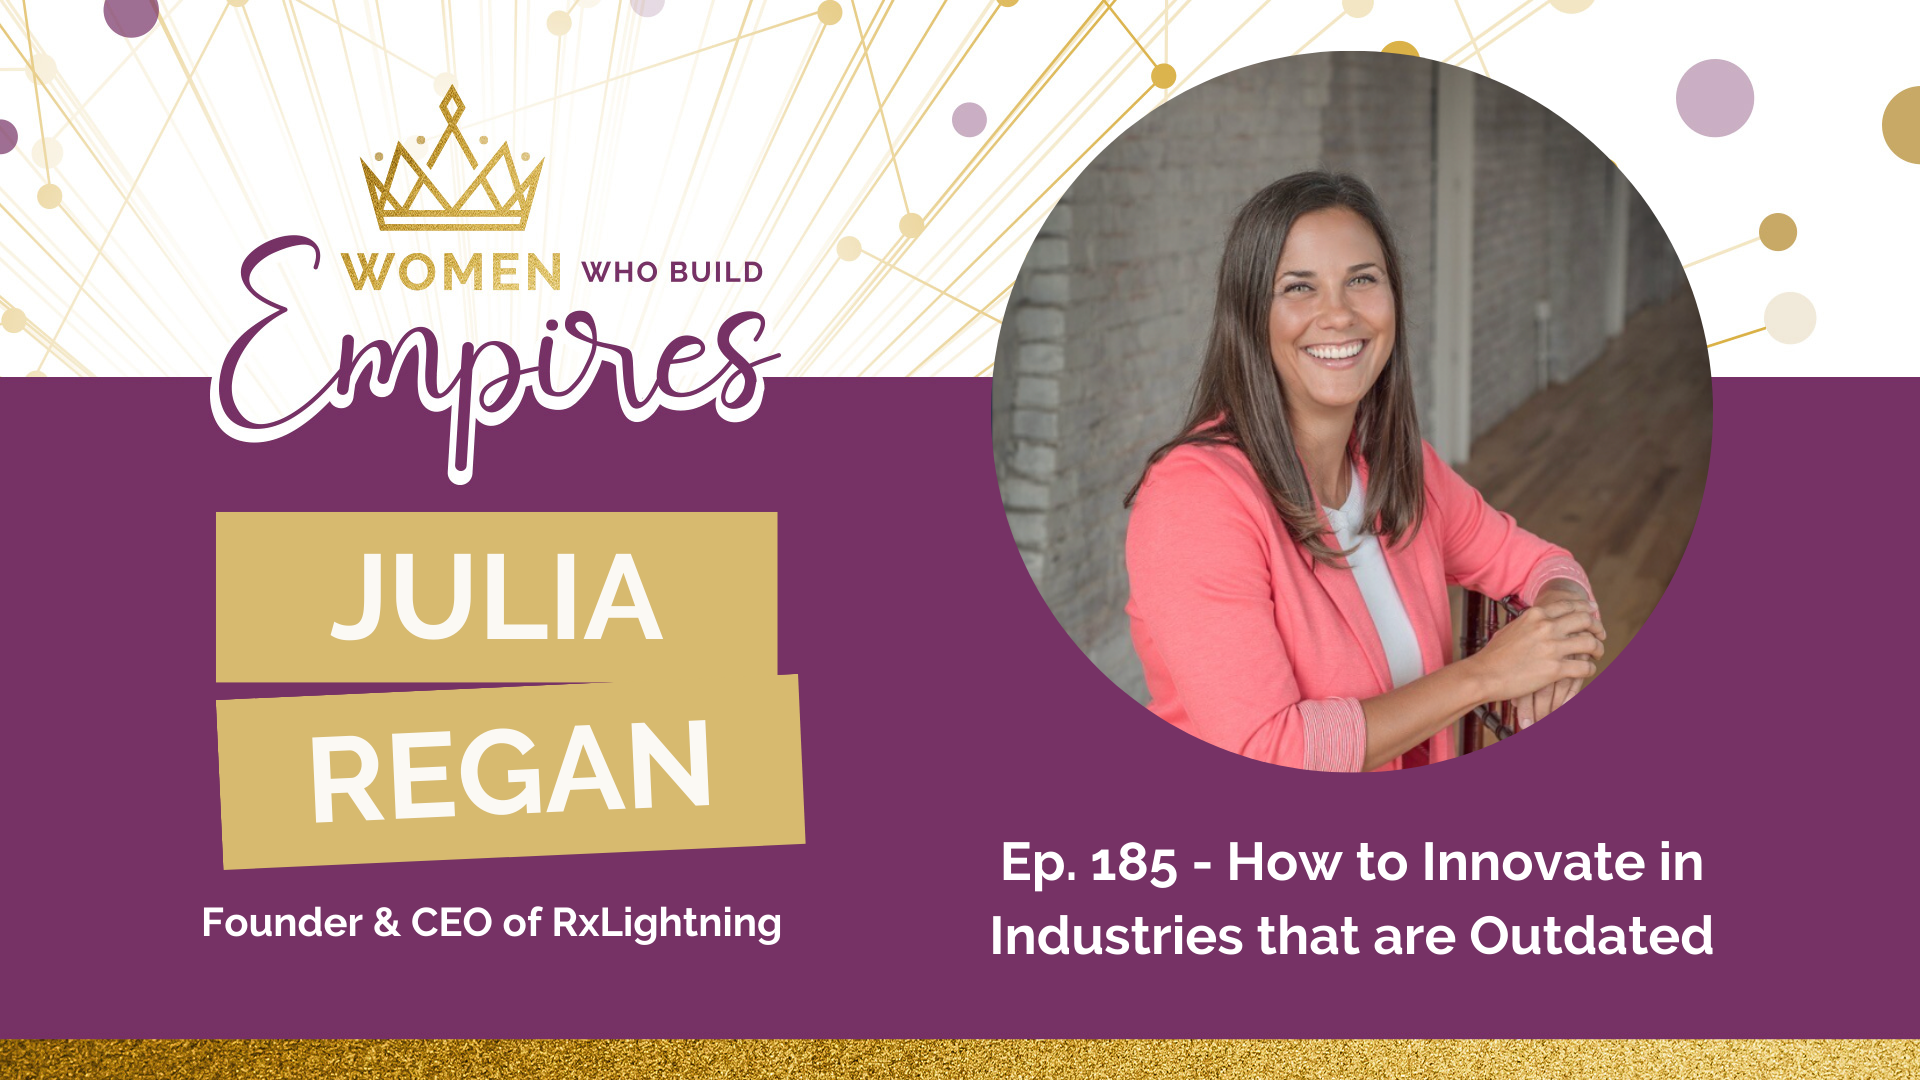 Ep. 185 Julia Regan: How to Innovate in Outdated Industries